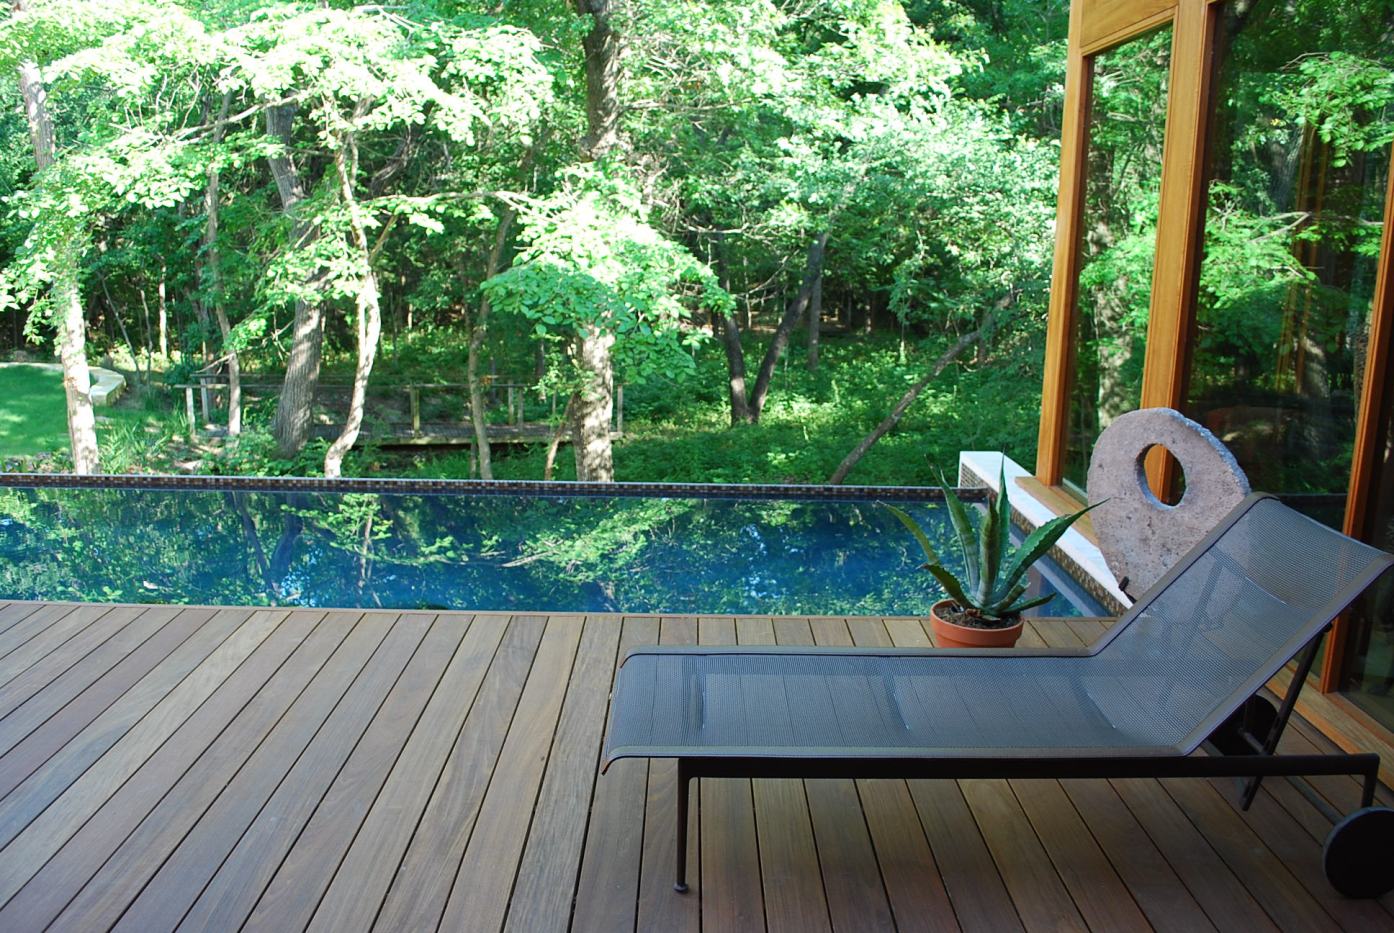 NJ deck company Ipe poolside deck, modern rectangle pool with travertine bullnose, contemporary home